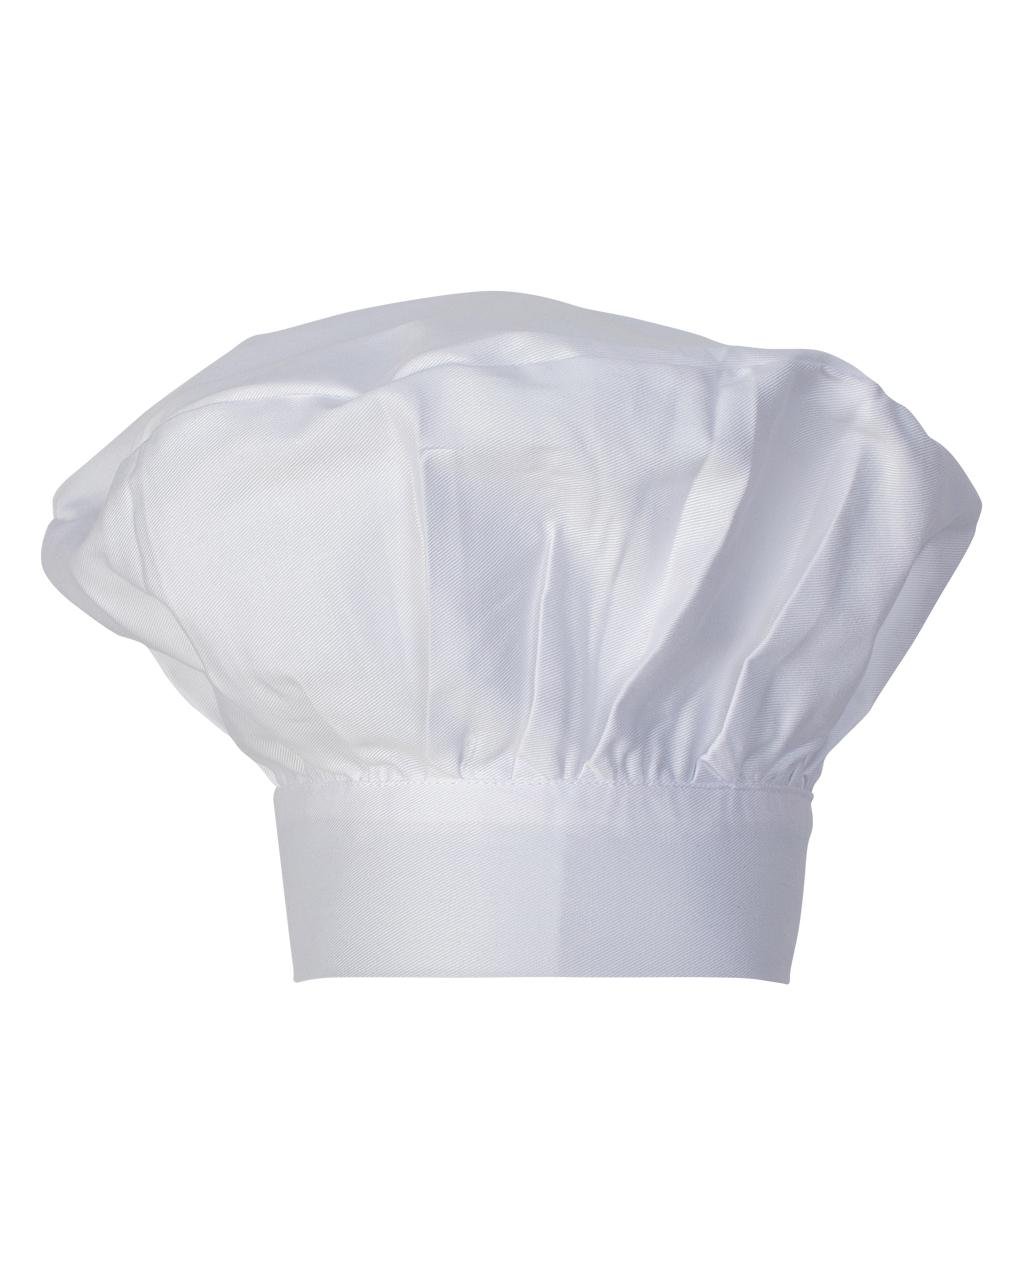 Chef's Hat Cotton Pictor